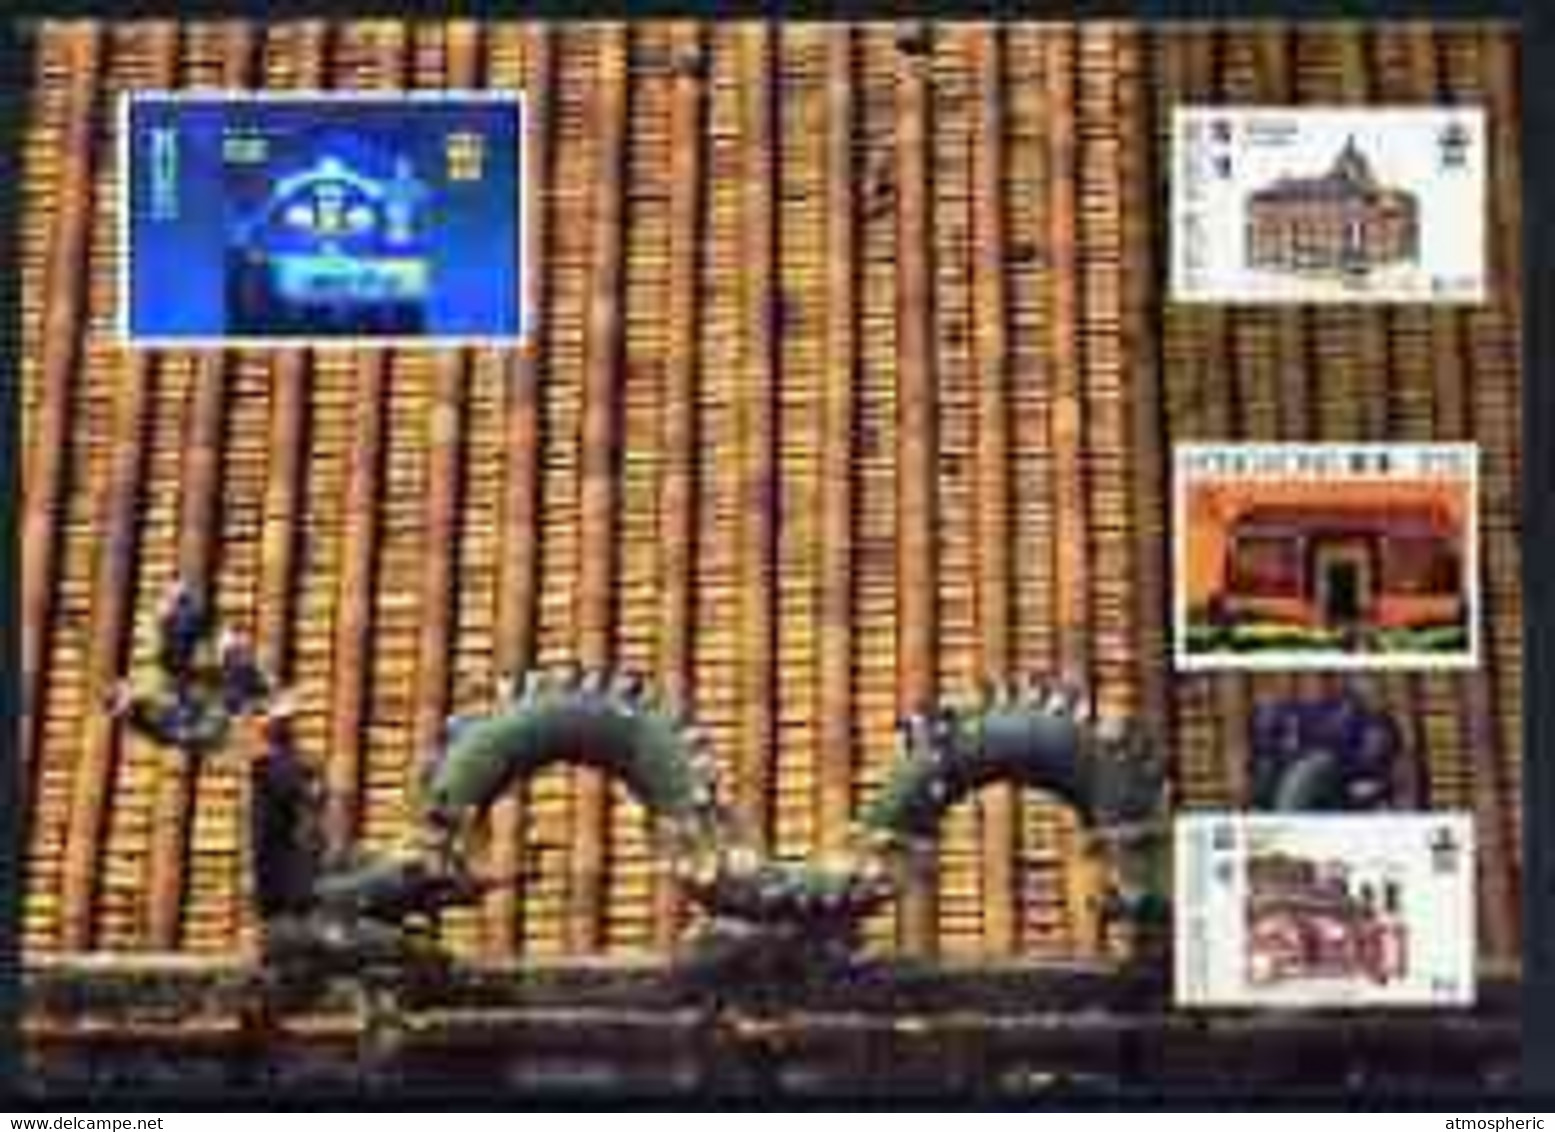 Hong Kong 1996 Hong Kong '97 Stamp Exhibition Hologram Postcard No 6 (Wan Chai Post Office) Showing $5 Post Office Stamp - Covers & Documents